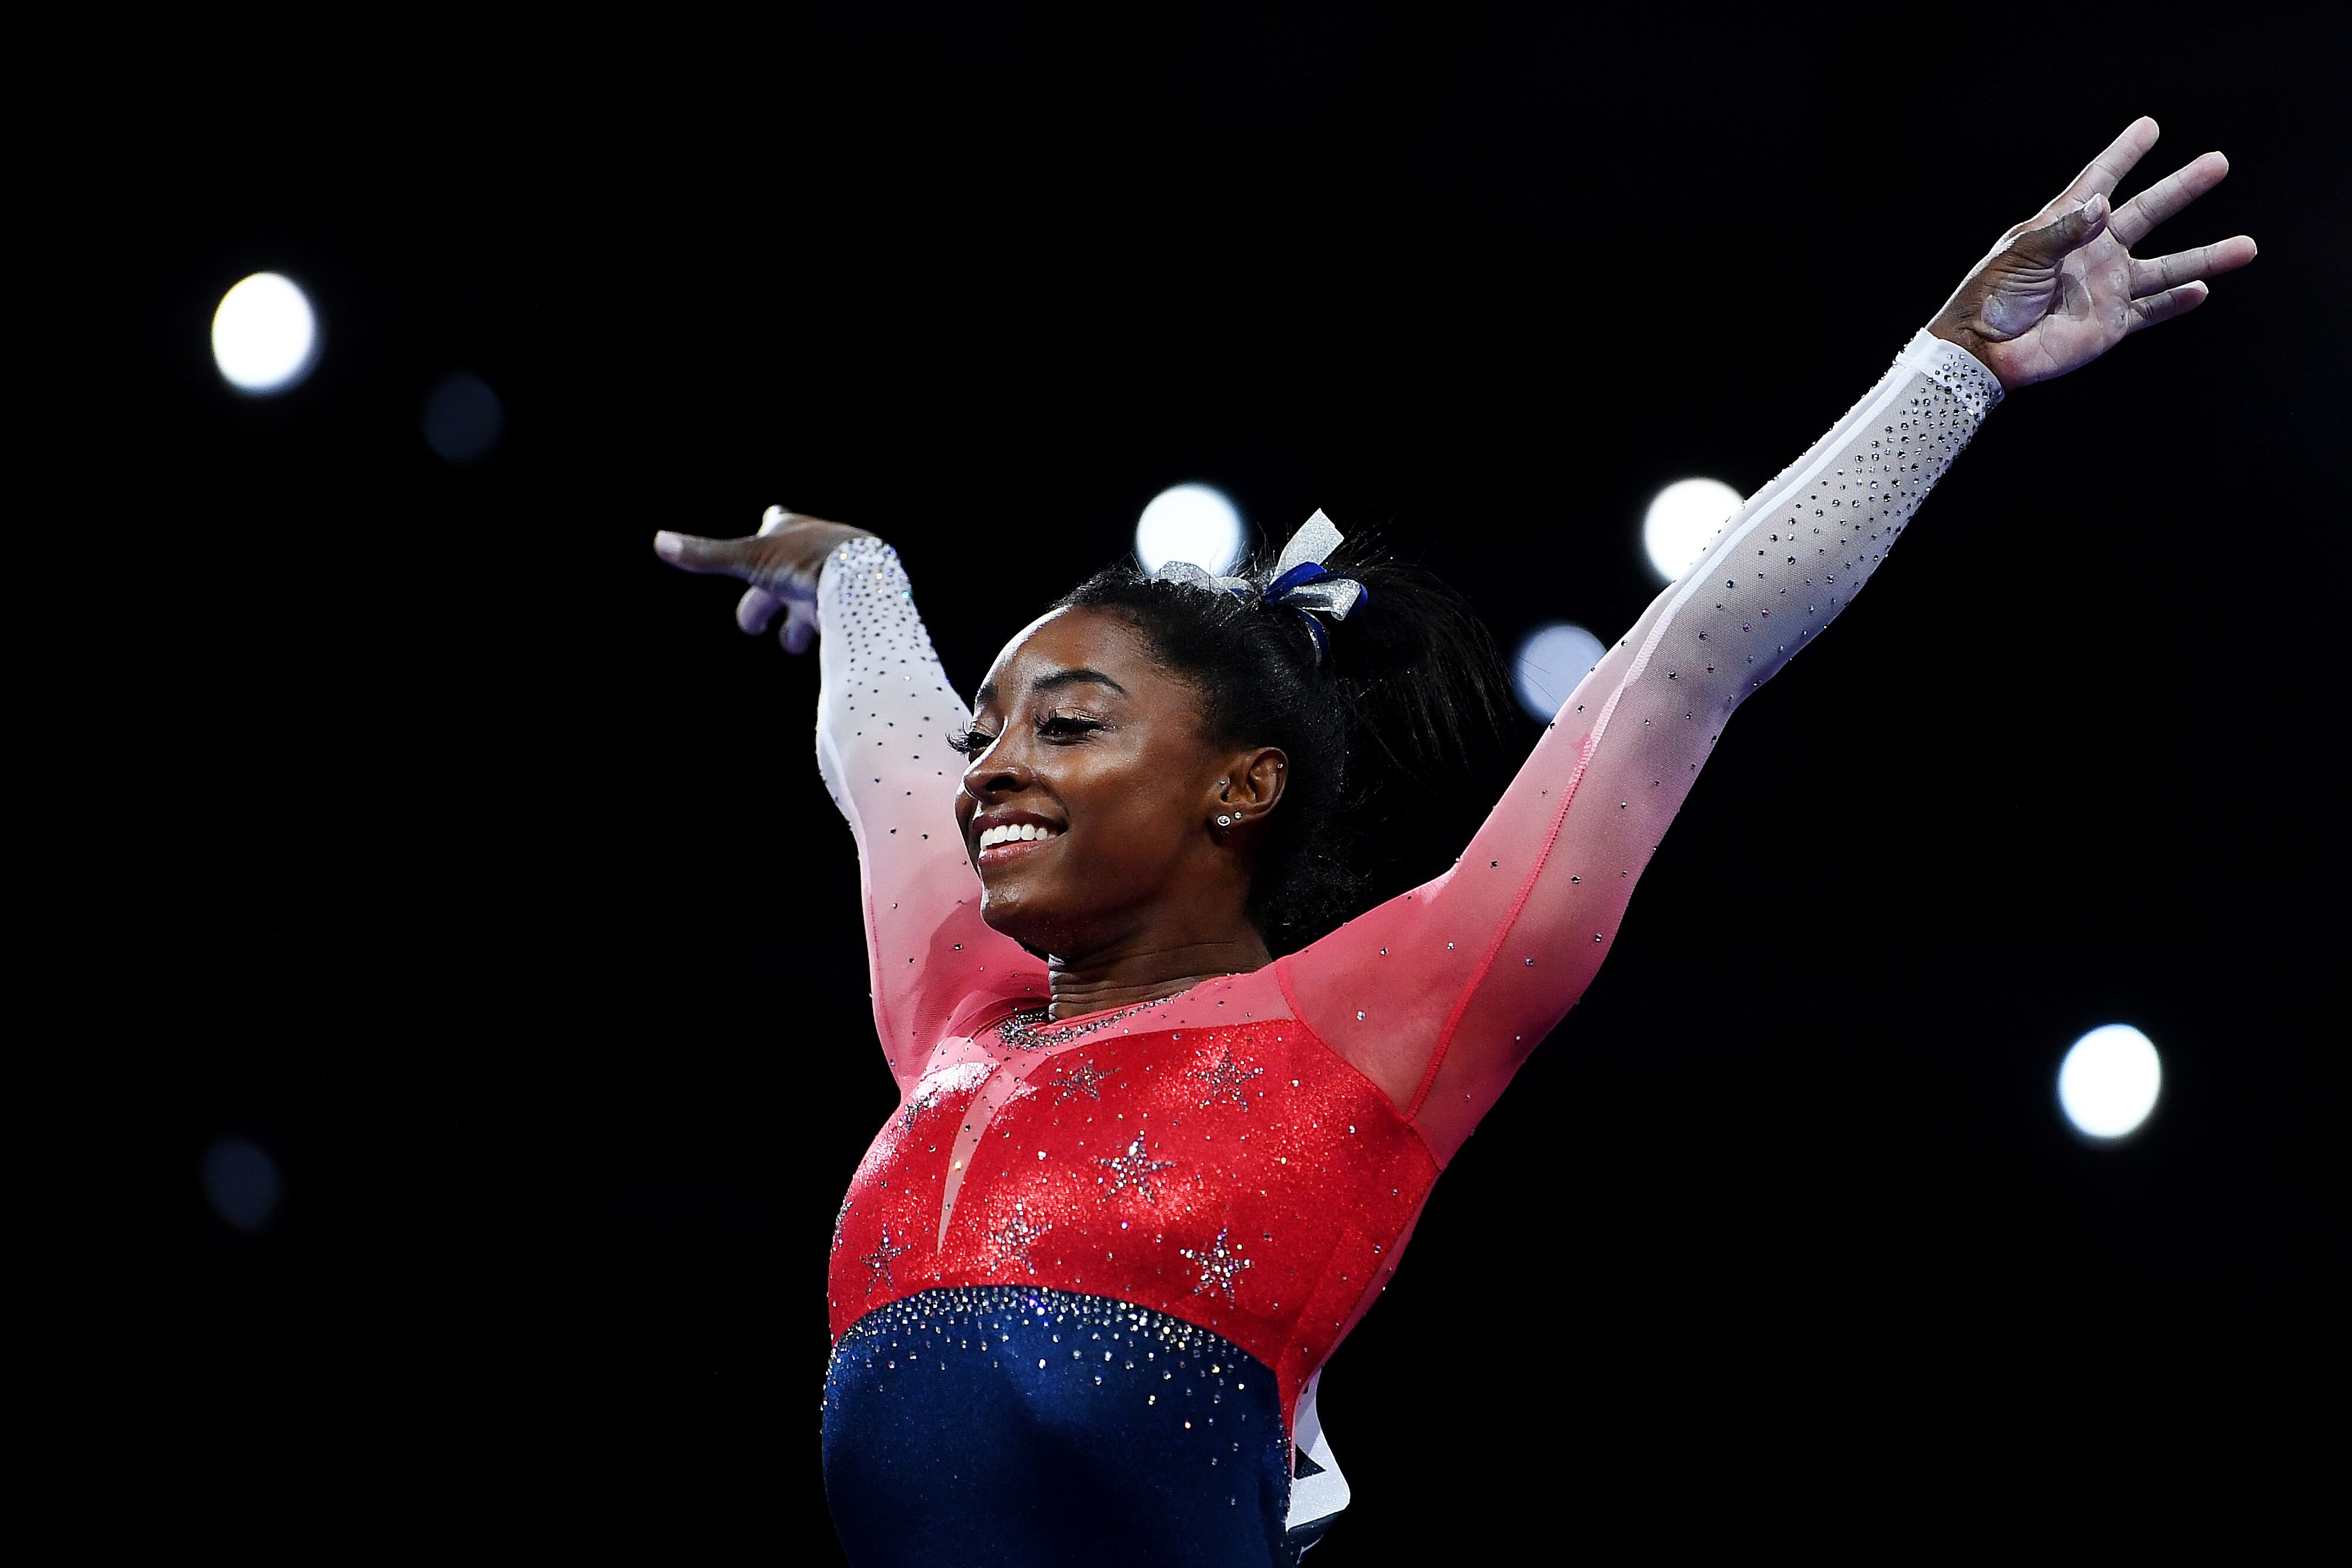 Simone Biles during the FIG Artistic Gymnastics World Championships on Oct. 08, 2019 in Germany. | Photo: Getty Images